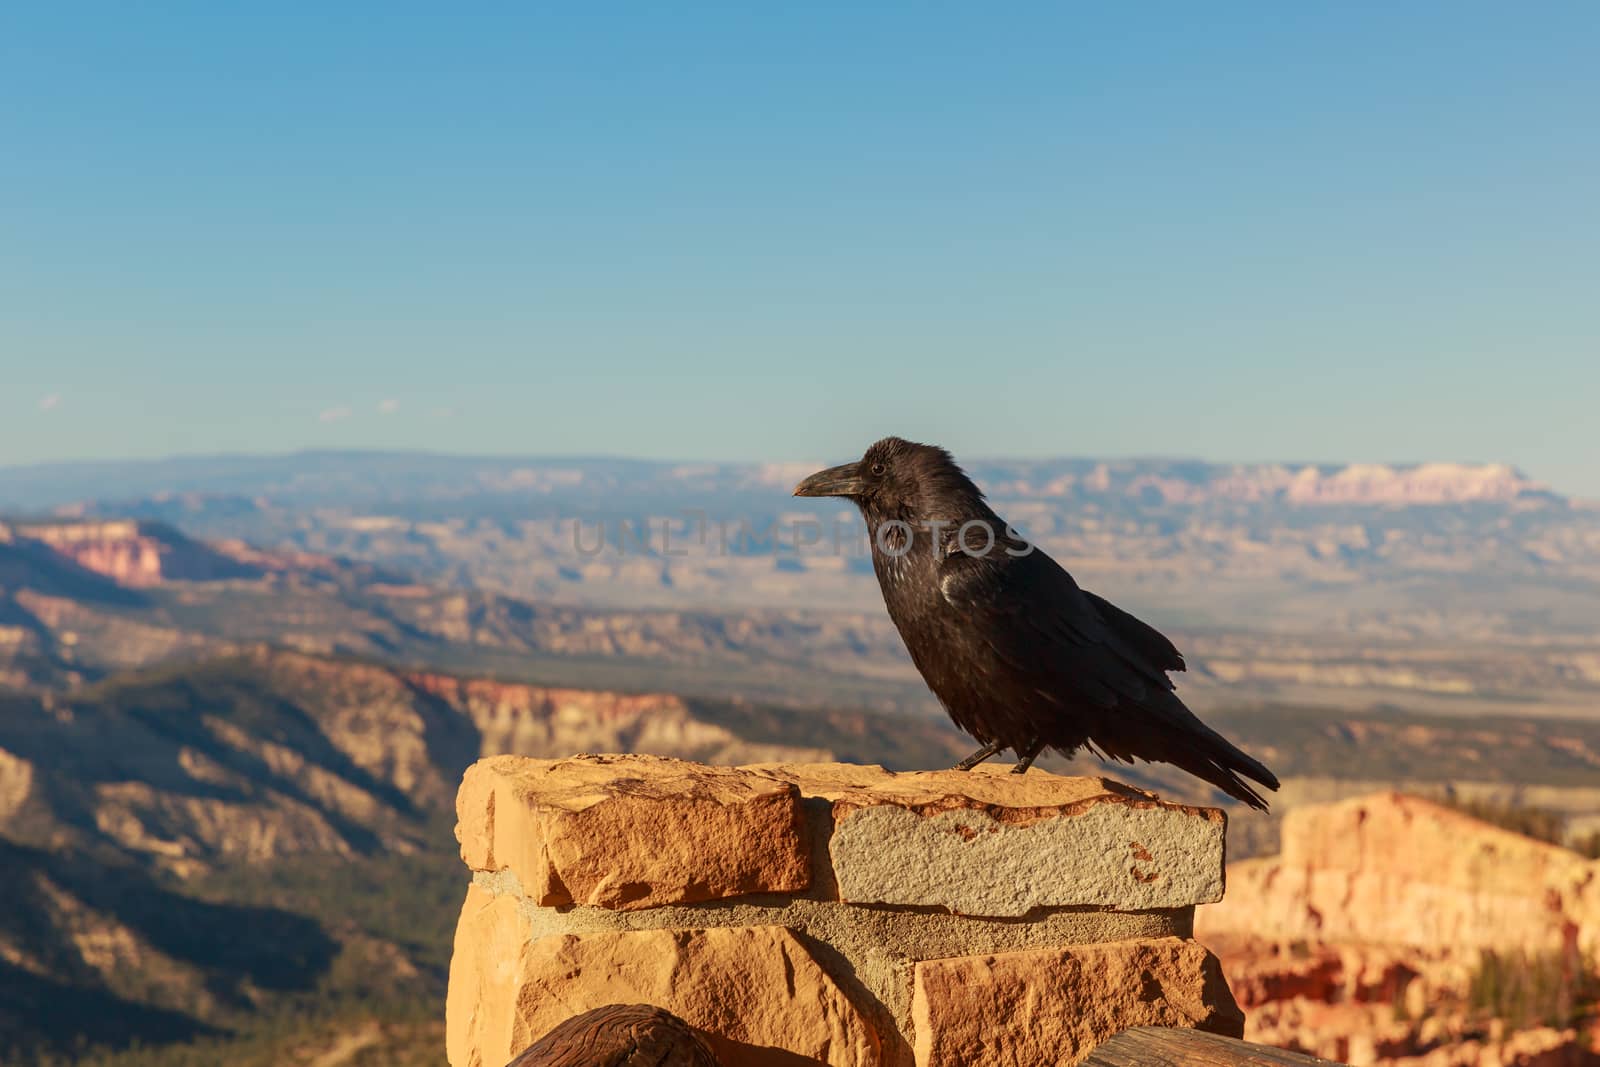 Raven at Bryce Canyon by pngstudio